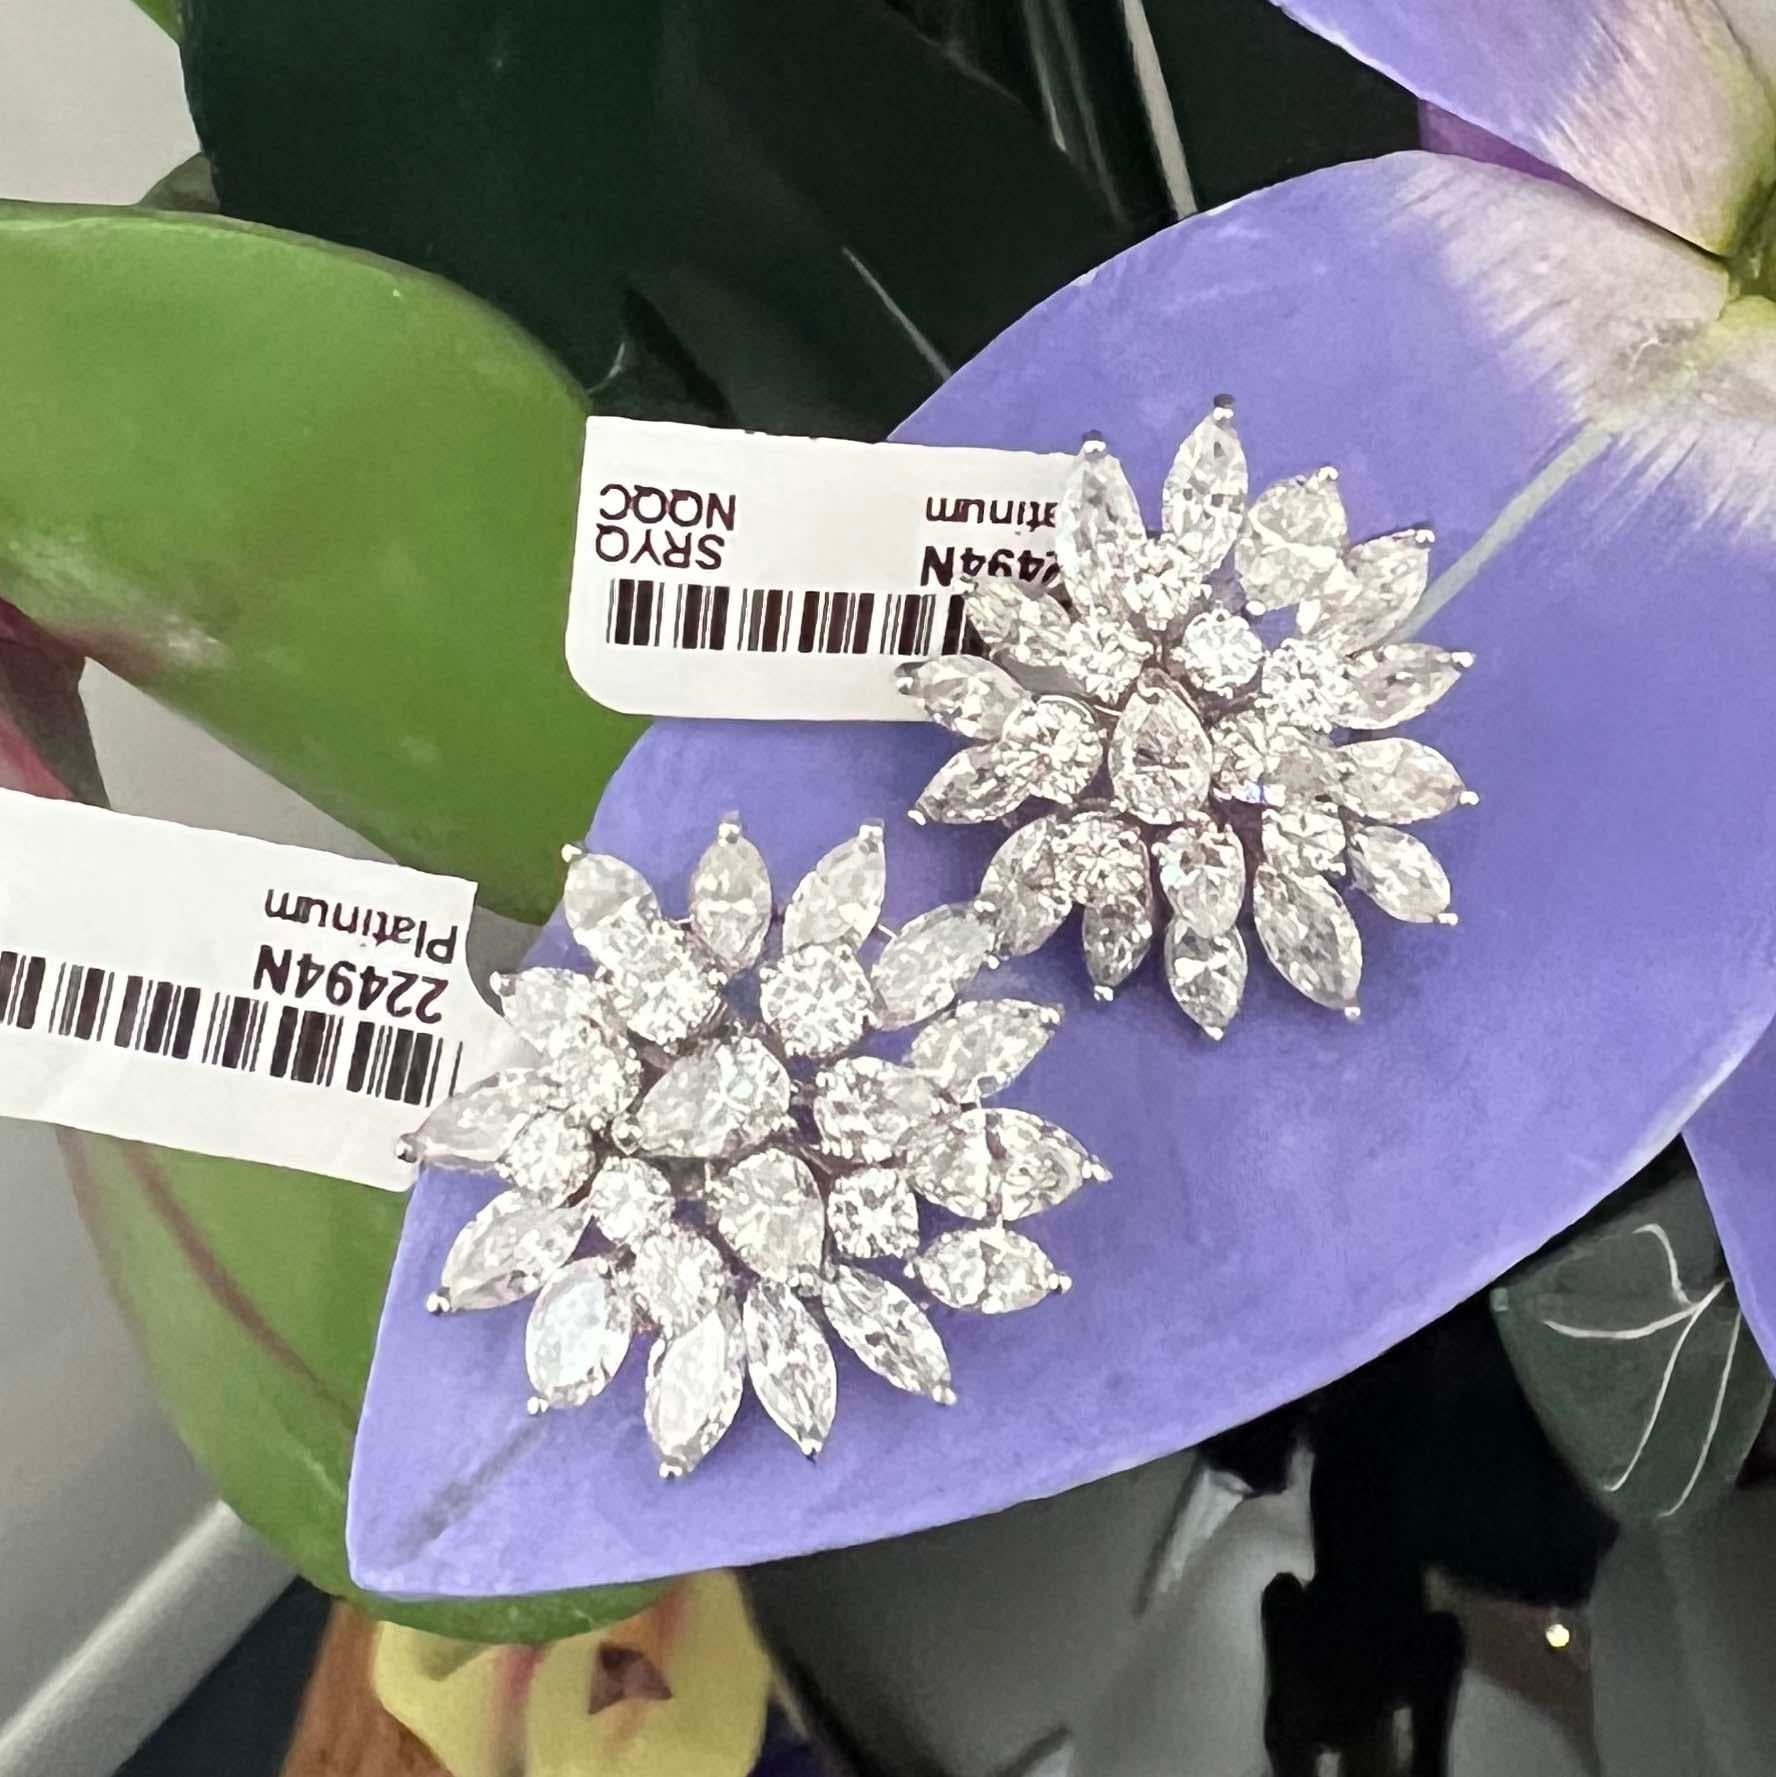 Platinum 9.50 carat cluster diamond stud earrings feature an array of round, marquise, and pear-shaped diamonds. With 48 diamonds weighing an estimated 9.50 carats, these earrings sparkle with impressive brilliance. The diamonds are G-H color, VS-SI